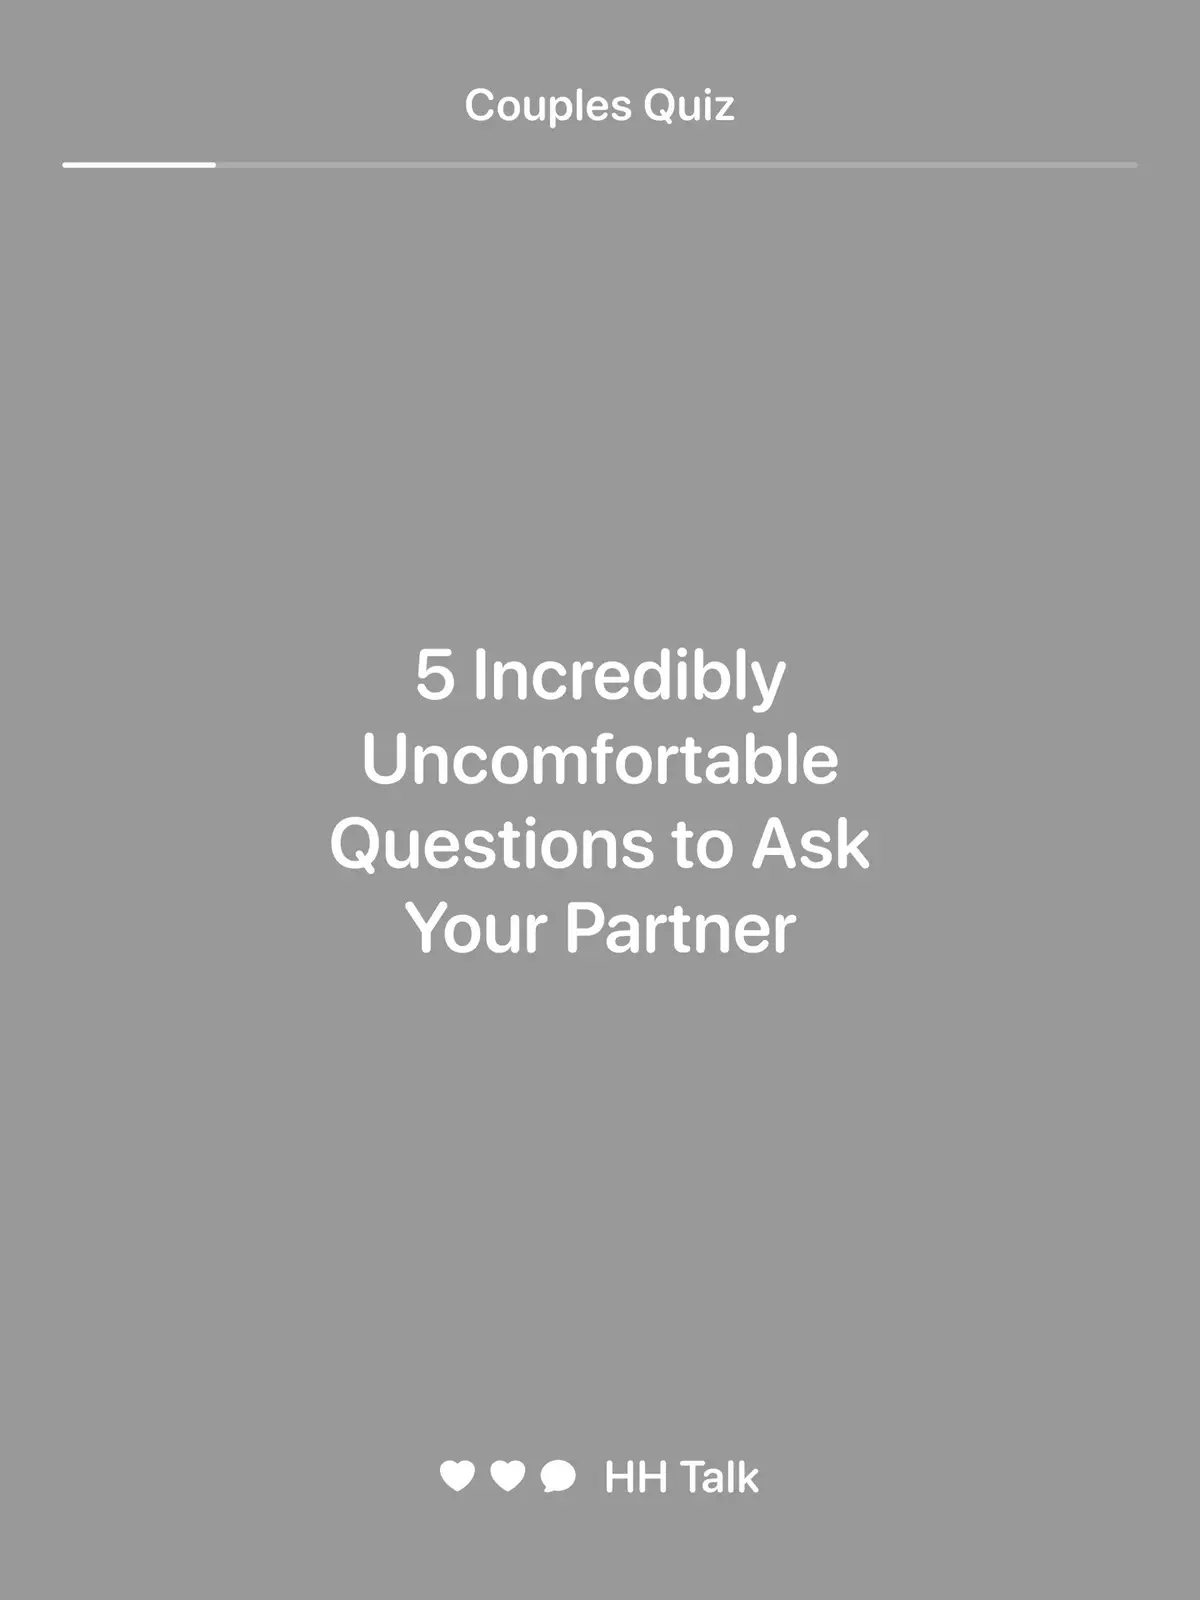 💭 Ready to go deep? Ask these 5 incredibly uncomfortable questions to your partner and uncover the truths of your relationship. 💬 #RelationshipGoals #DeepTalks #CoupleQuestions #HonestyMatters #TruthOrDare #LoveQuestions